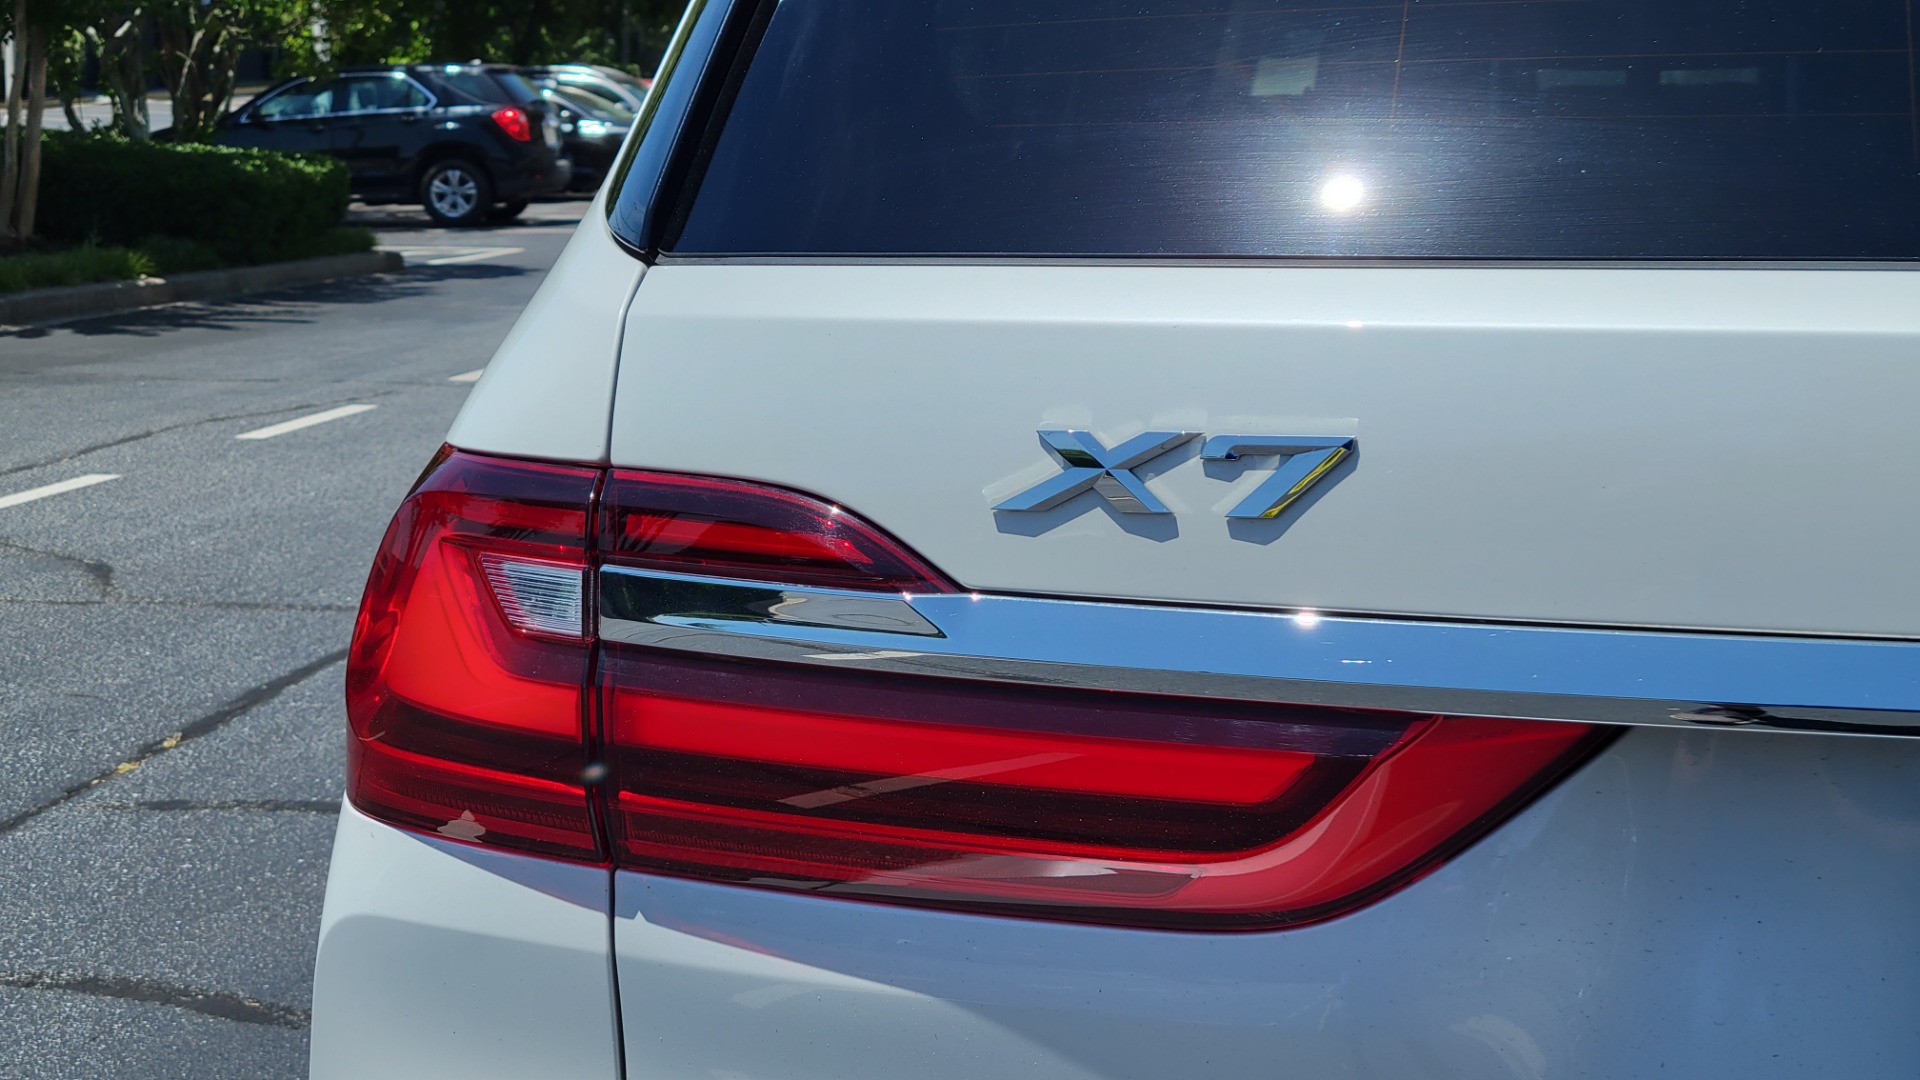 Used 2019 BMW X7 XDRIVE40I PREMIUM / NAV / HUD / PARK ASST PLUS / REMOTE START / 3D VIEW for sale $62,995 at Formula Imports in Charlotte NC 28227 40